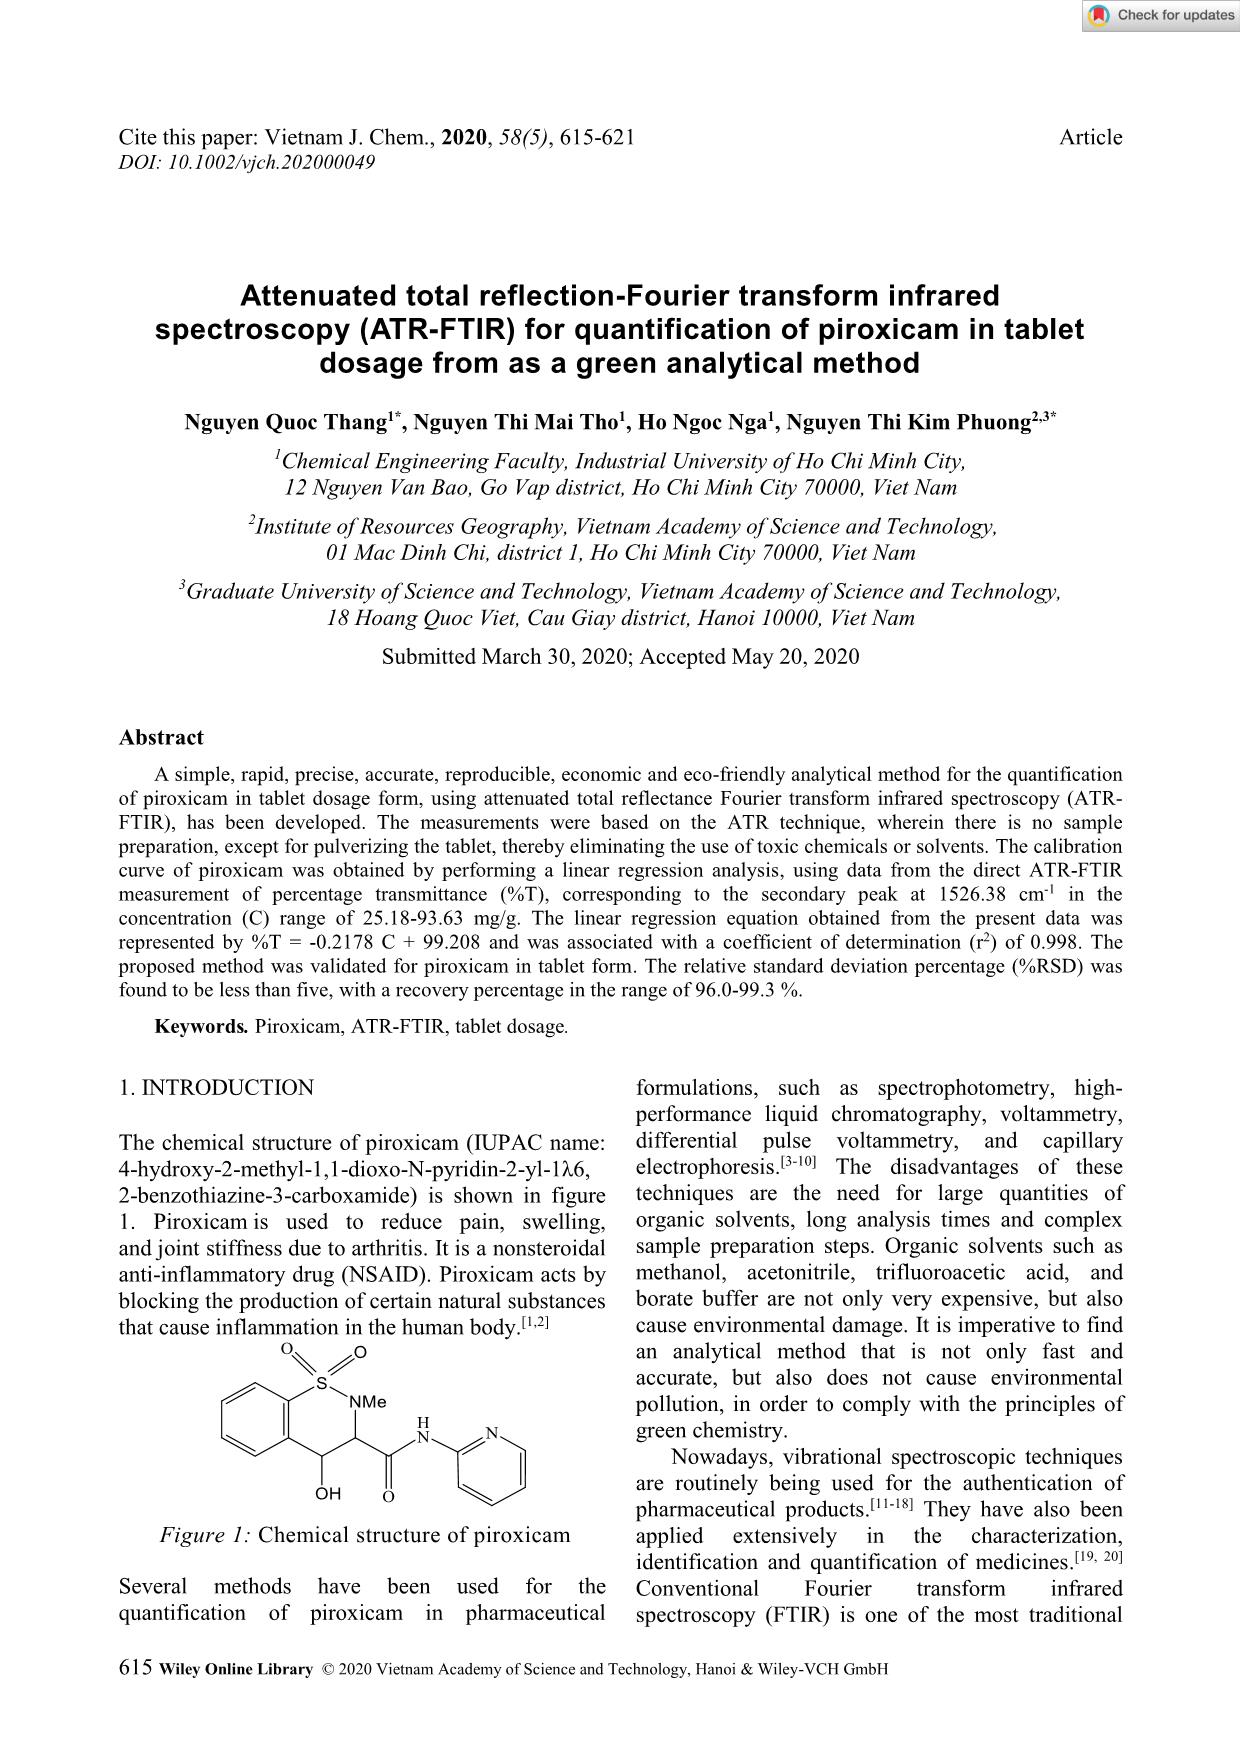 Attenuated total reflection-Fourier transform infrared spectroscopy (ATR-FTIR) for quantification of piroxicam in tablet dosage from as a green analytical method trang 1